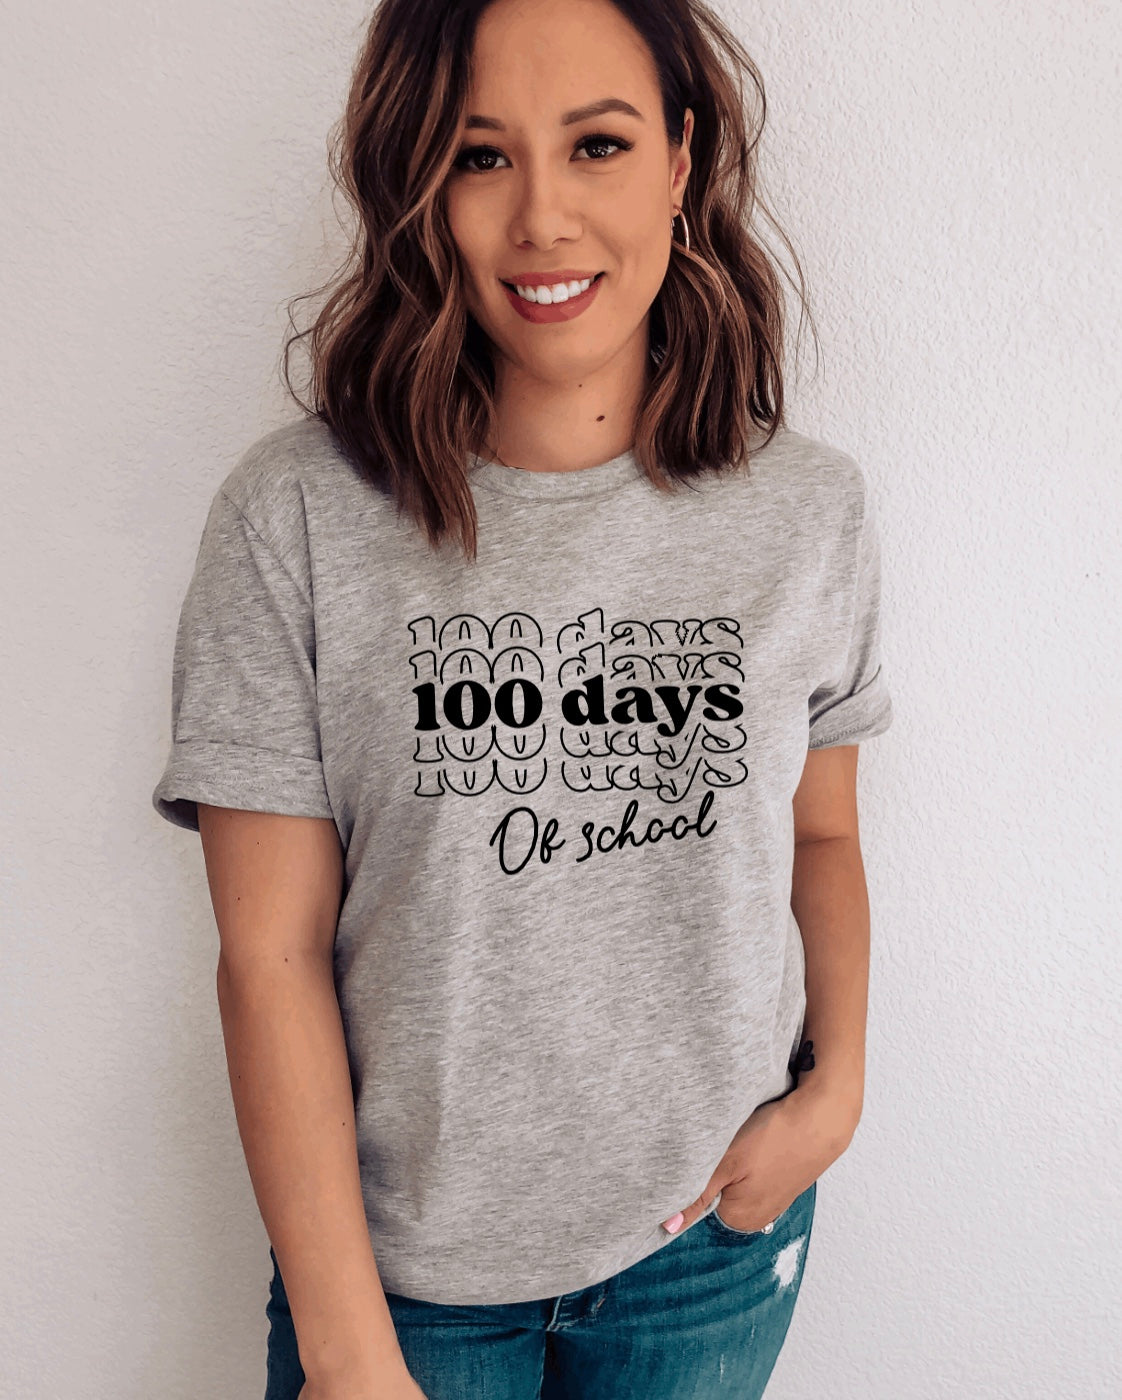 One hundred days of school t-shirt 